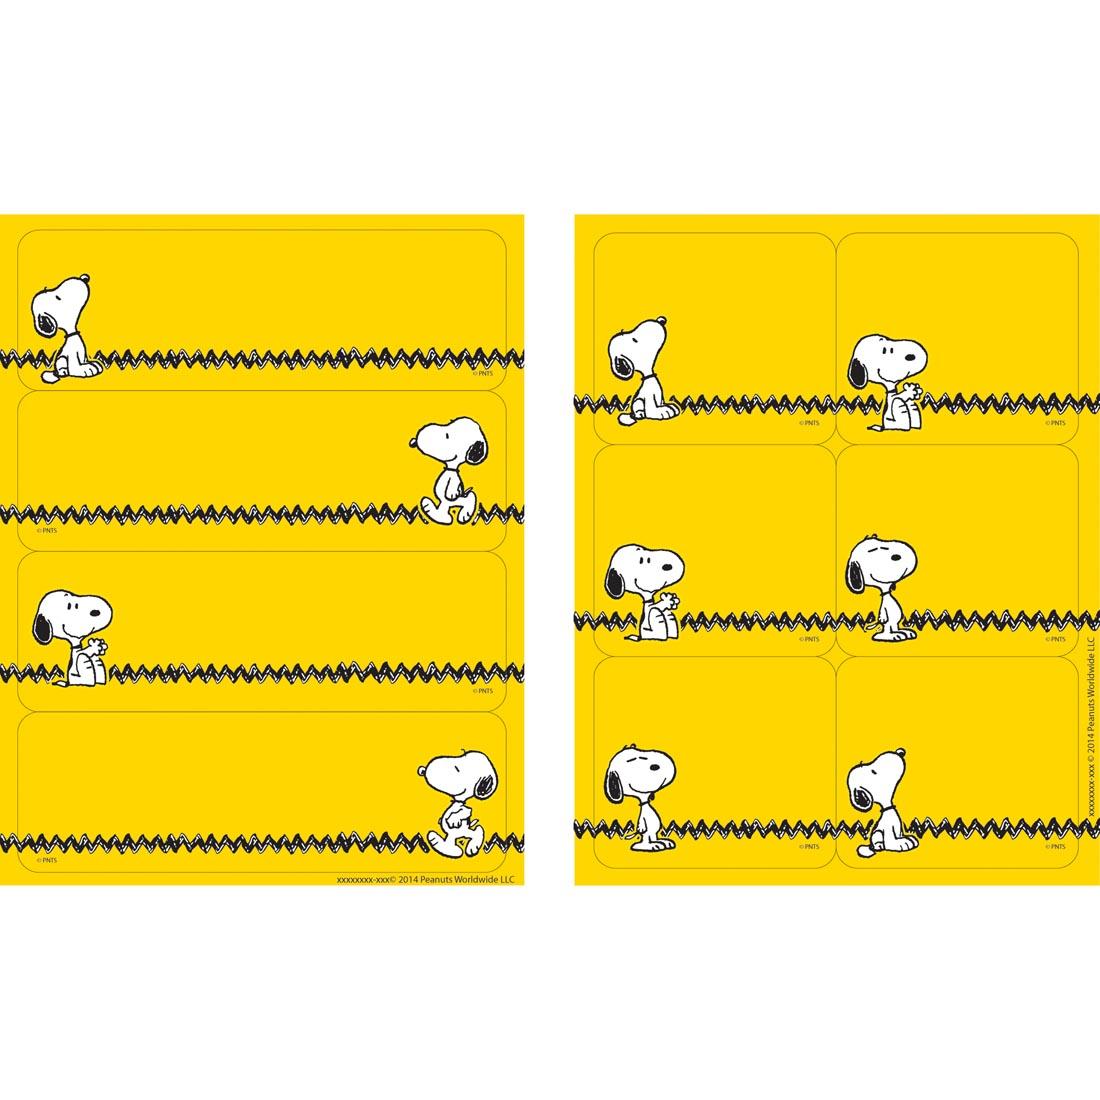 Peanuts Yellow Label Stickers by Eureka look like Charlie Brown's shirt